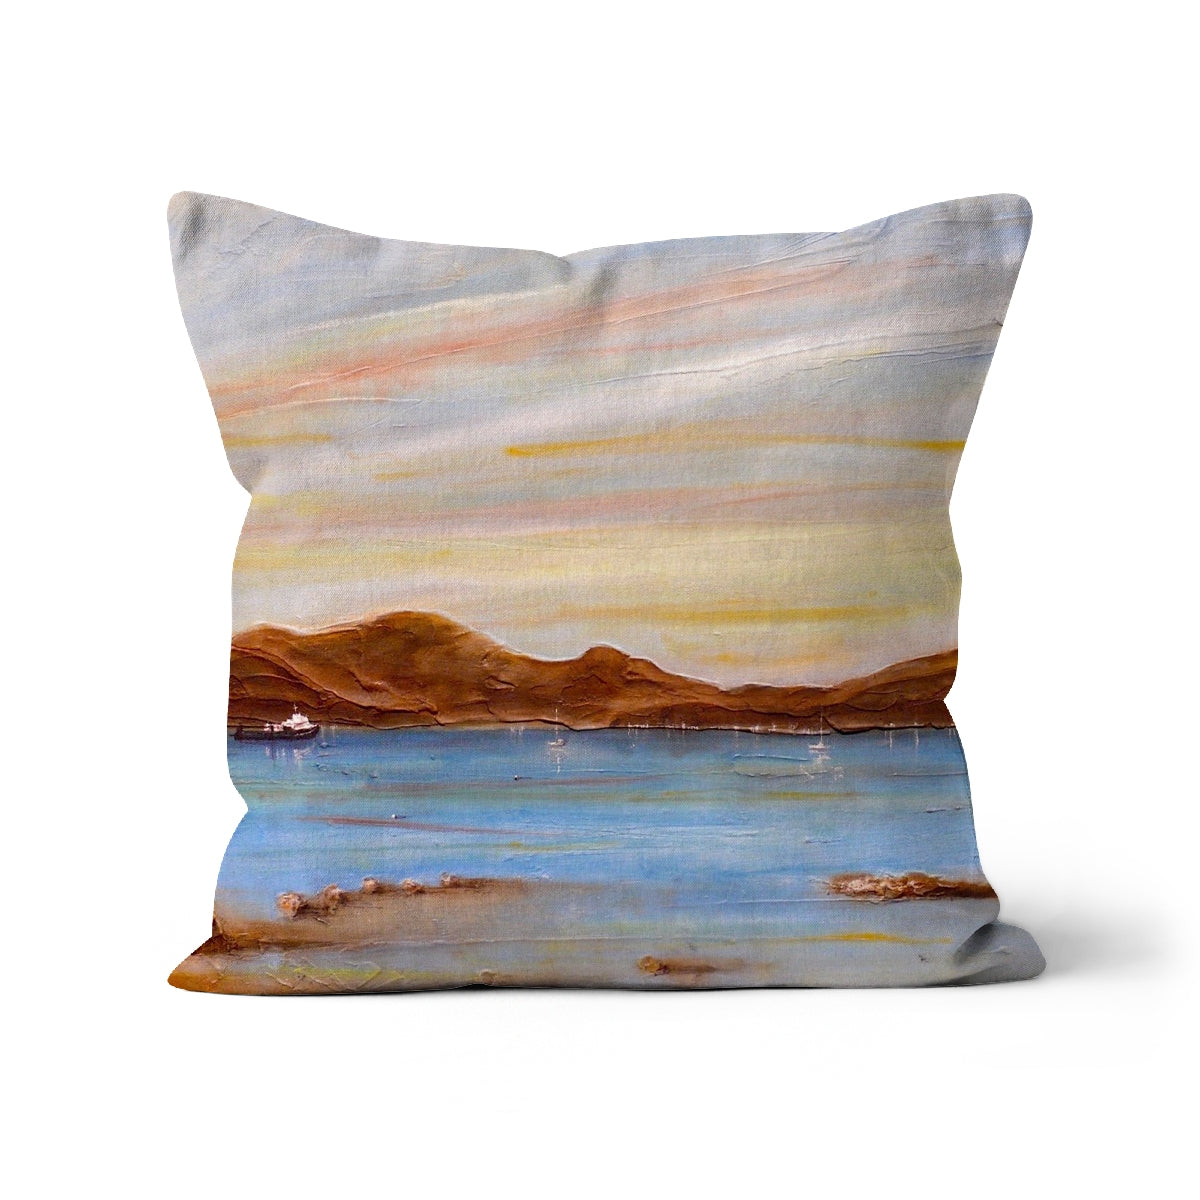 The Last Ferry To Dunoon Art Gifts Cushion-Cushions-River Clyde Art Gallery-Faux Suede-12"x12"-Paintings, Prints, Homeware, Art Gifts From Scotland By Scottish Artist Kevin Hunter